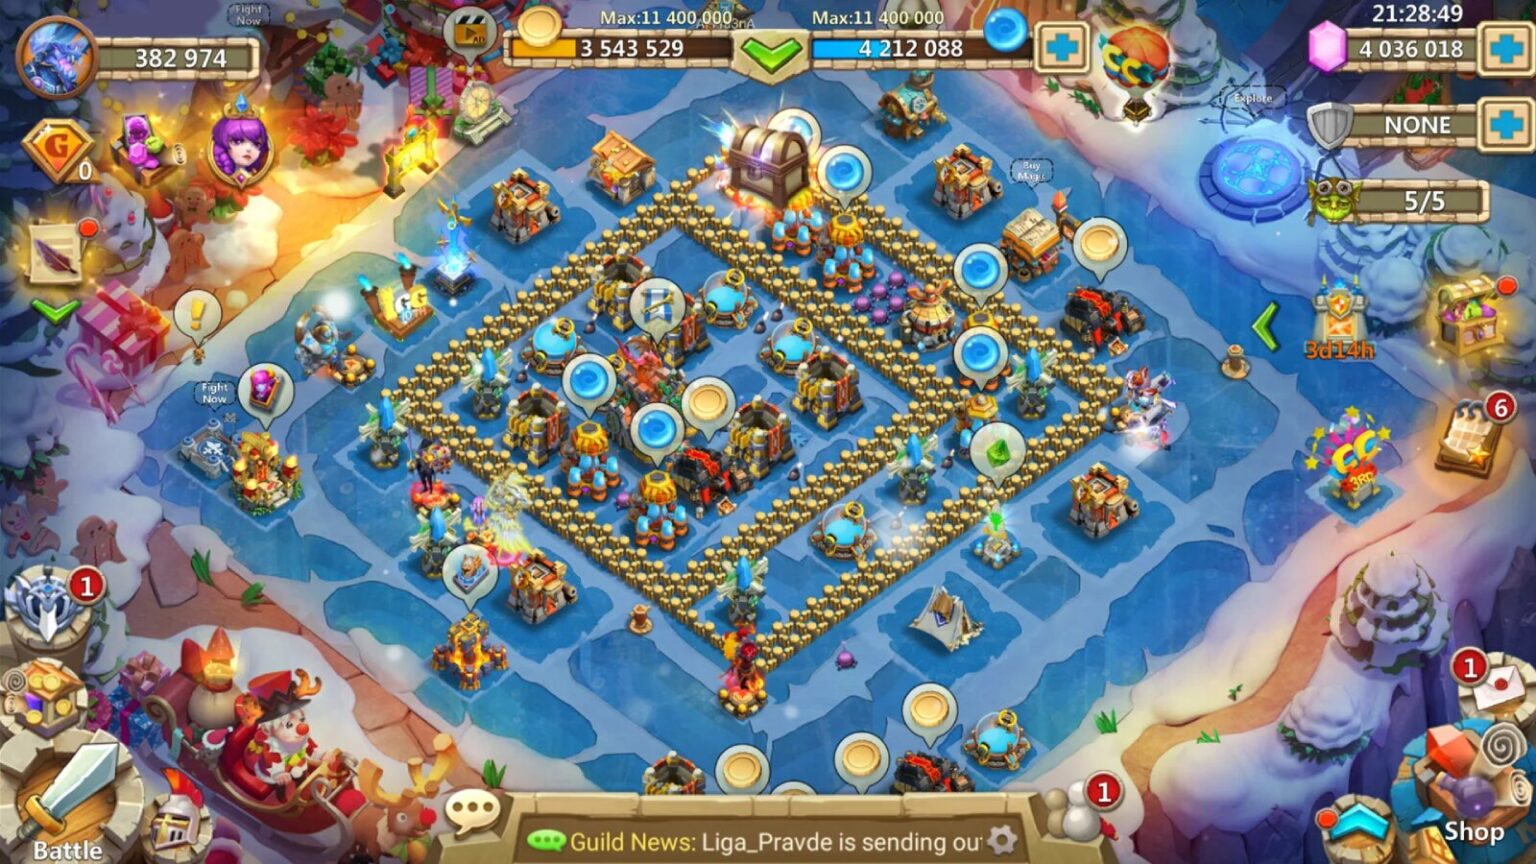 Download and conquer: the best strategy games for Android and iOS